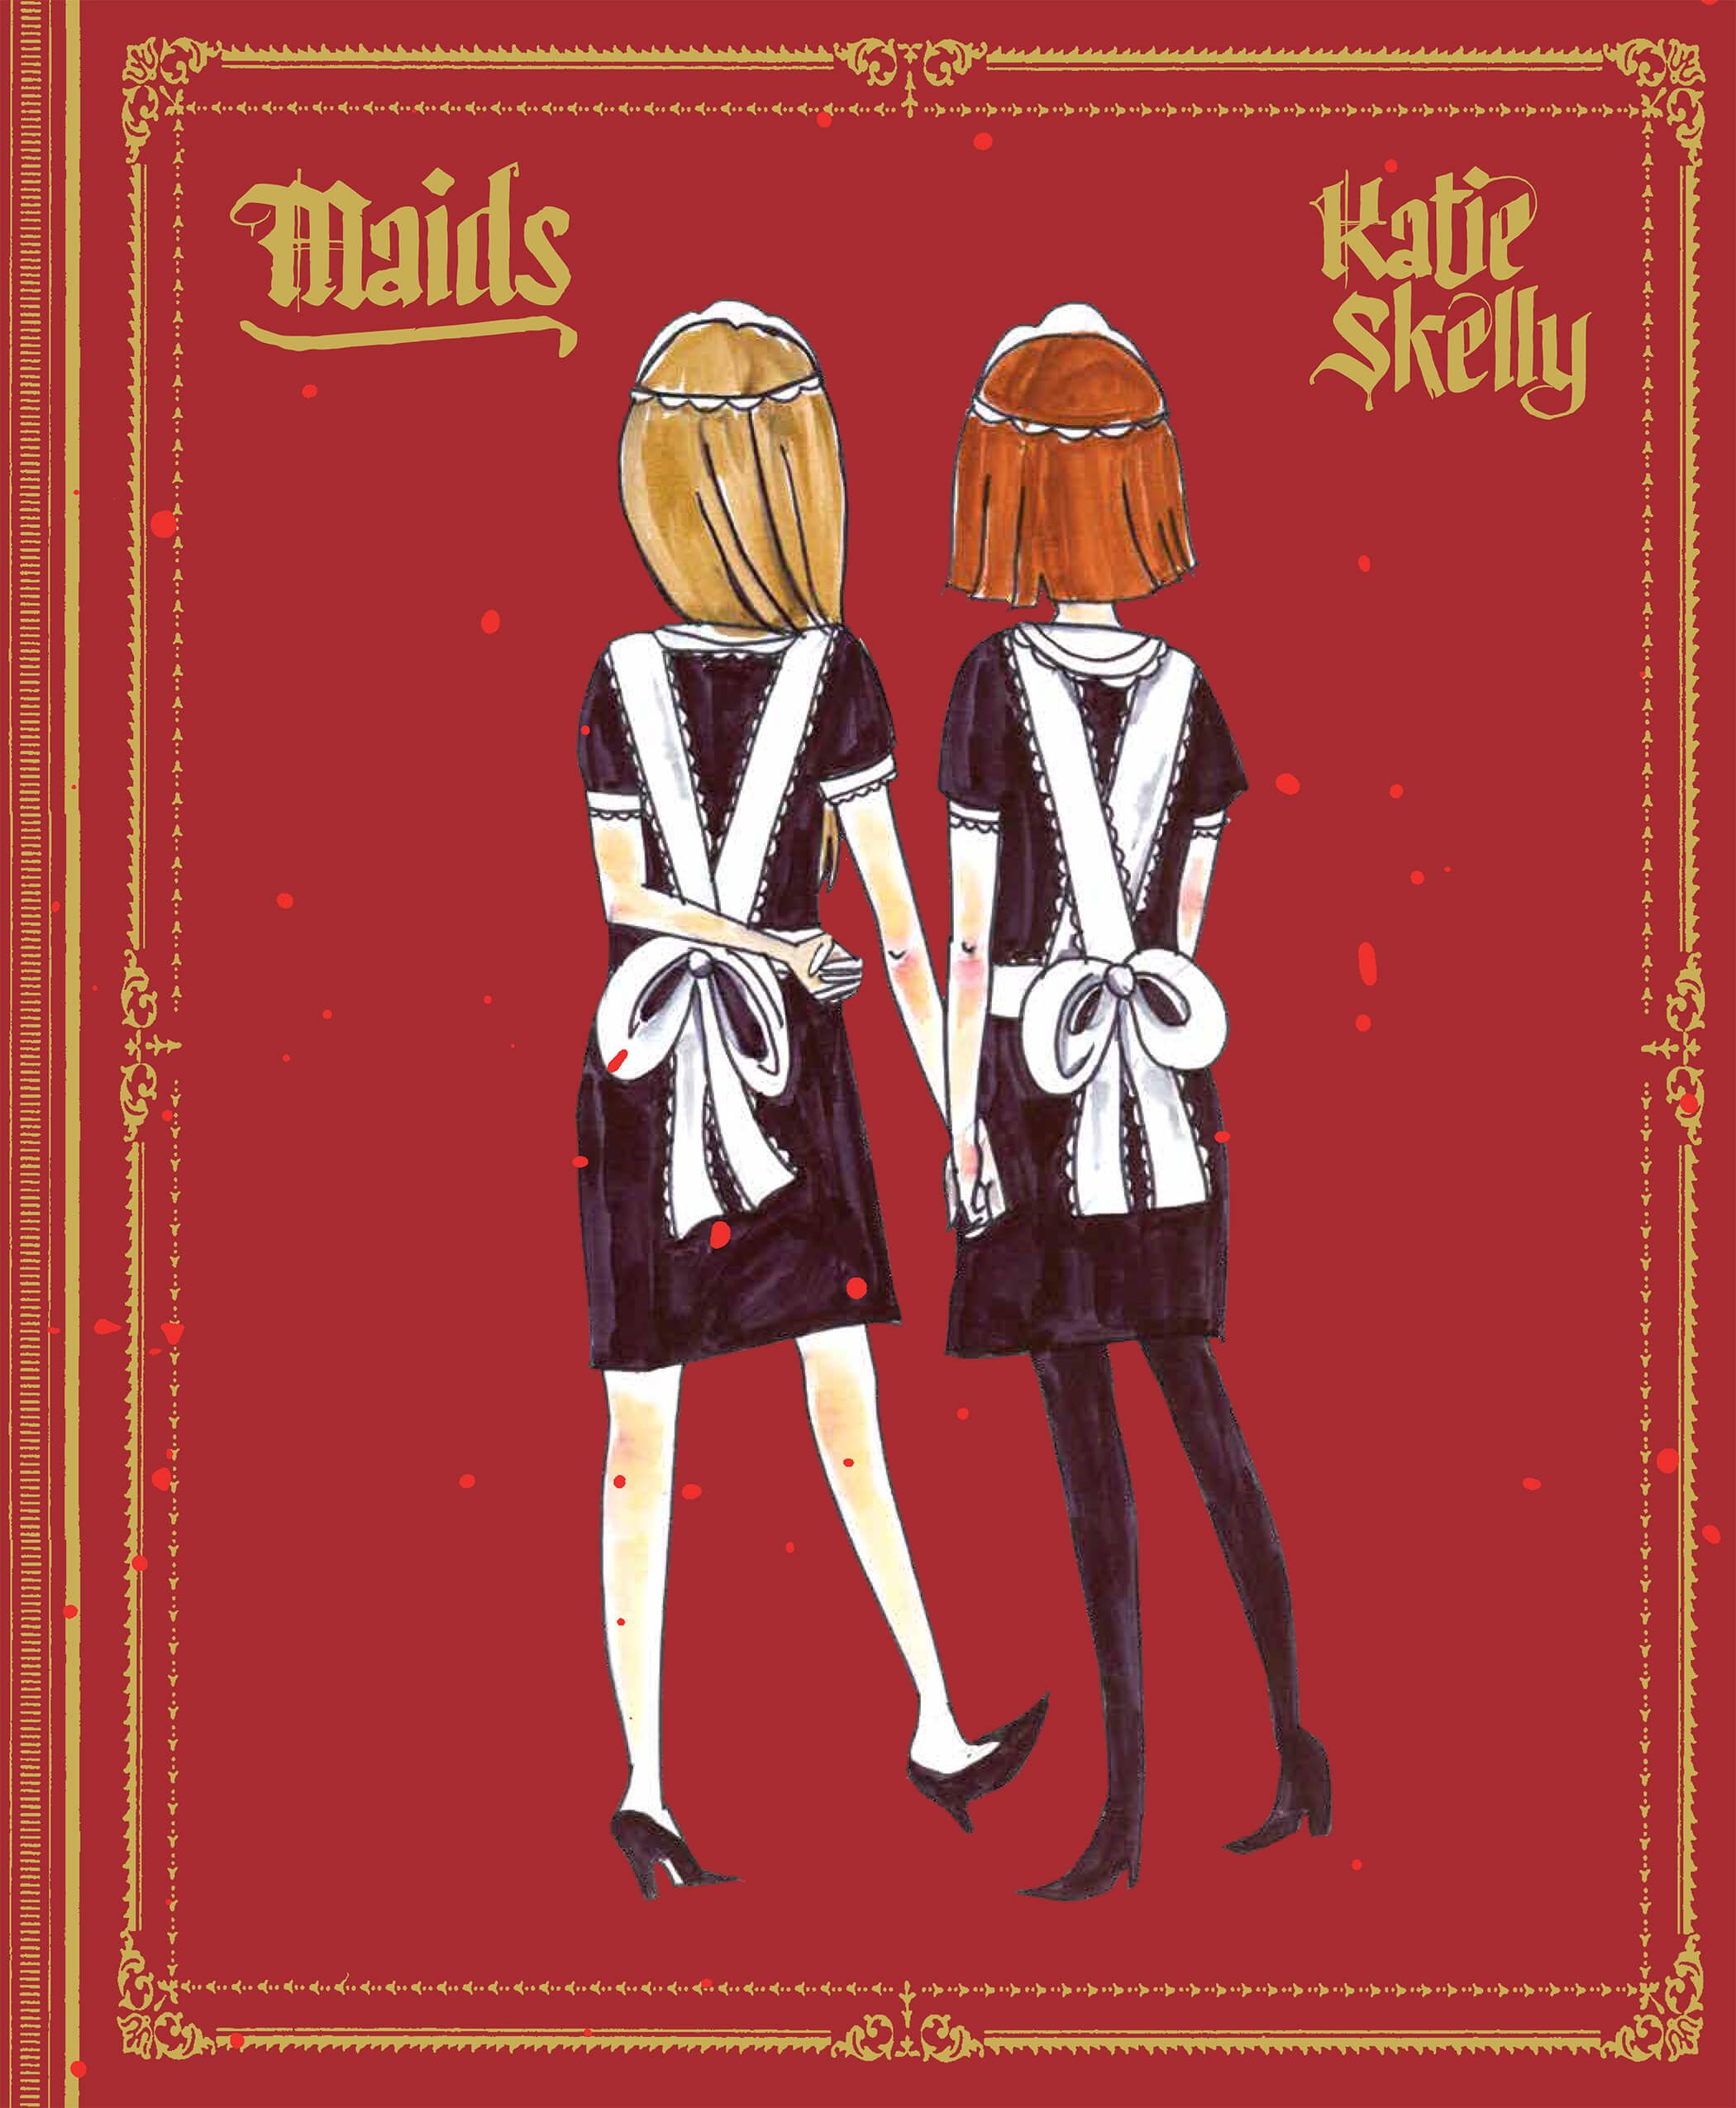 The Papin Sisters stand together on the cover of Katie Skelly's Maids